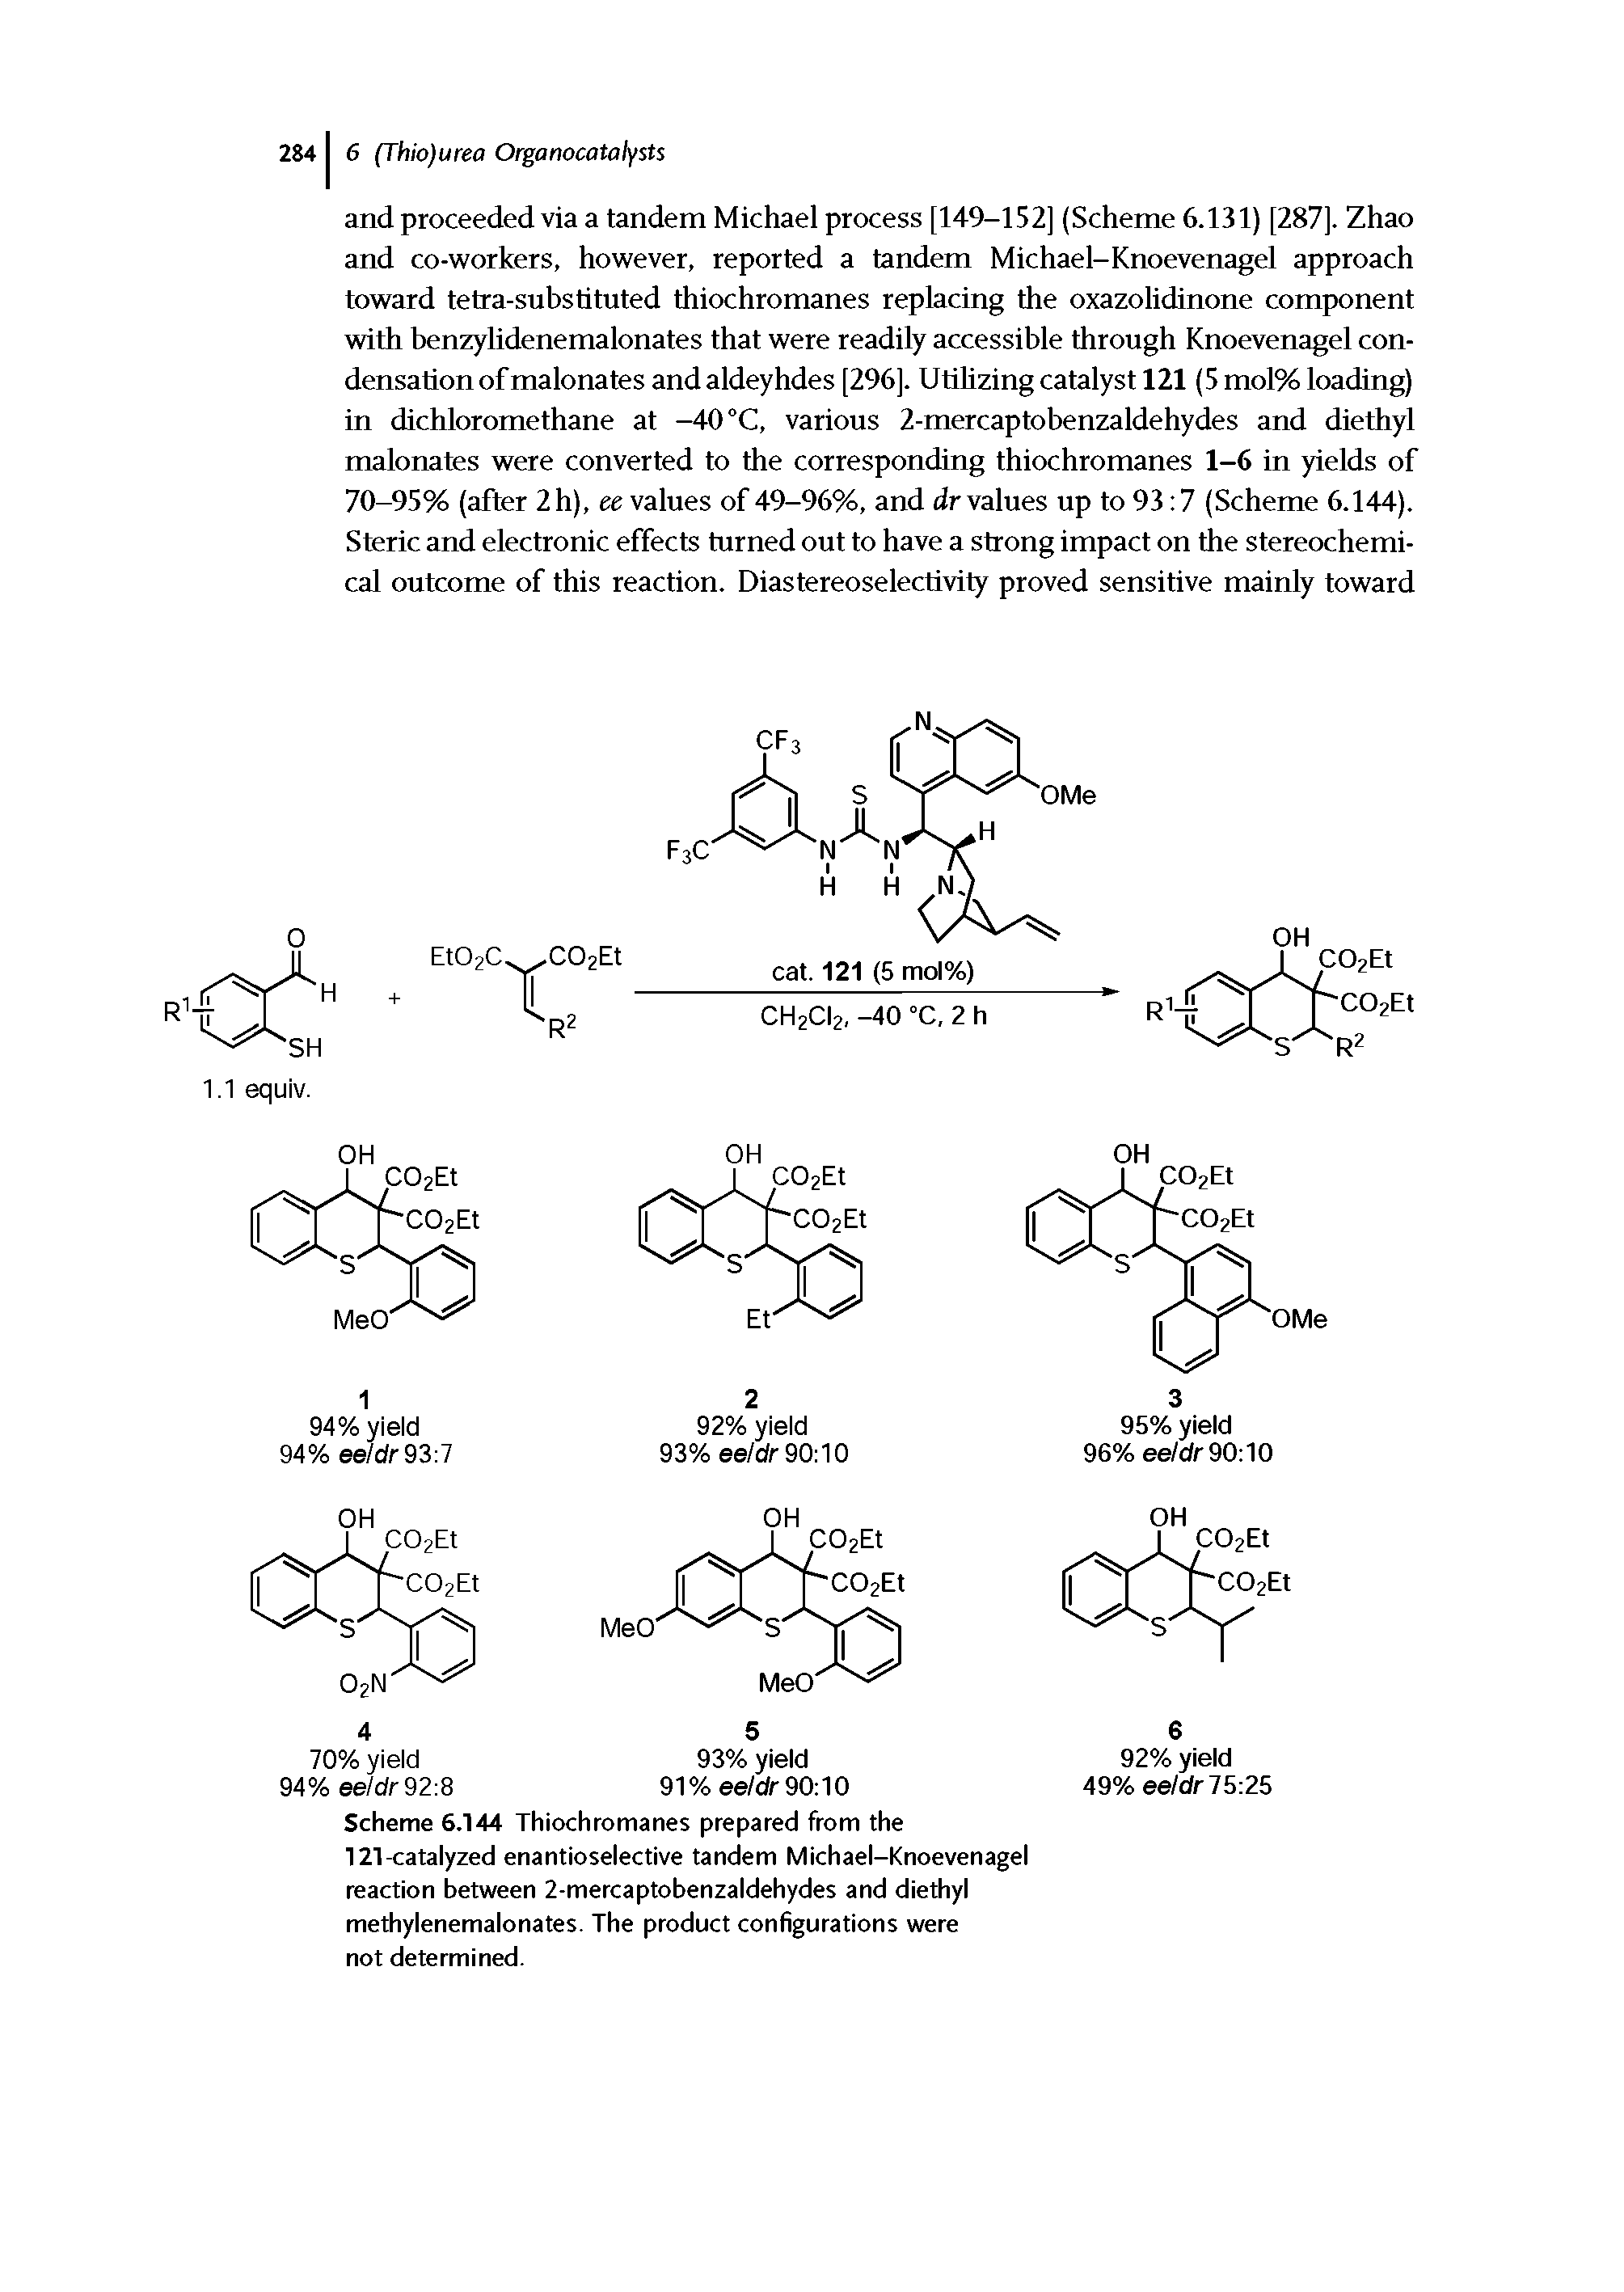 Scheme 6.144 Thiochromanes prepared from the 121-catalyzed enantioselective tandem Michael-Knoevenagel reaction between 2-mercaptobenzaldehydes and diethyl methylenemalonates. The product configurations were not determined.